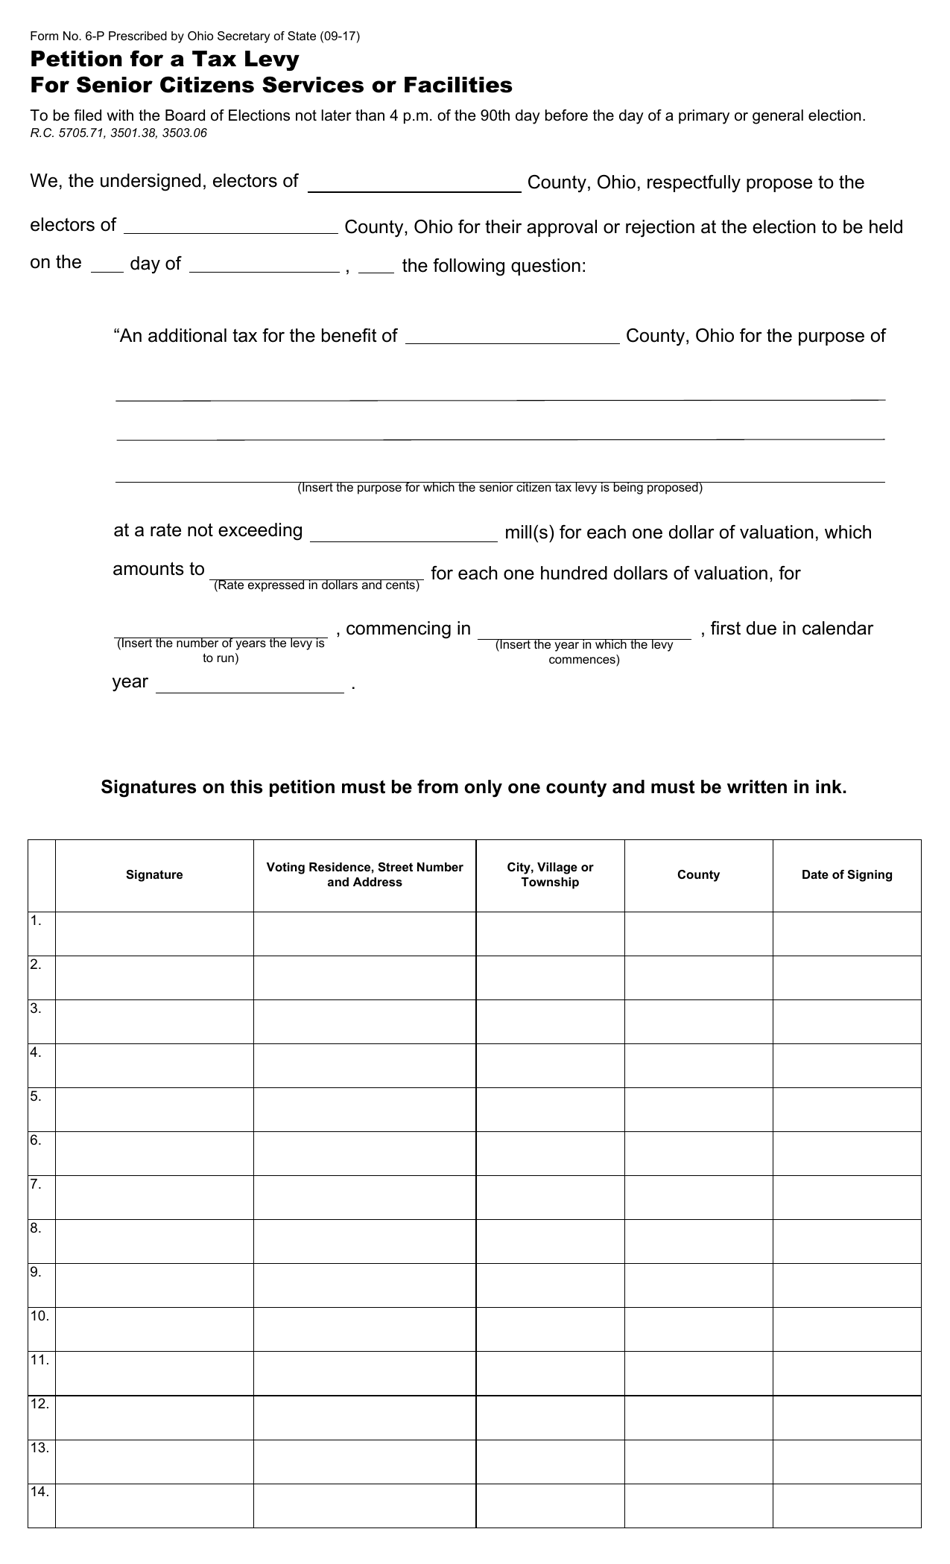 Form 6-P Petition for a Tax Levy for Senior Citizens Services or Facilities - Ohio, Page 1